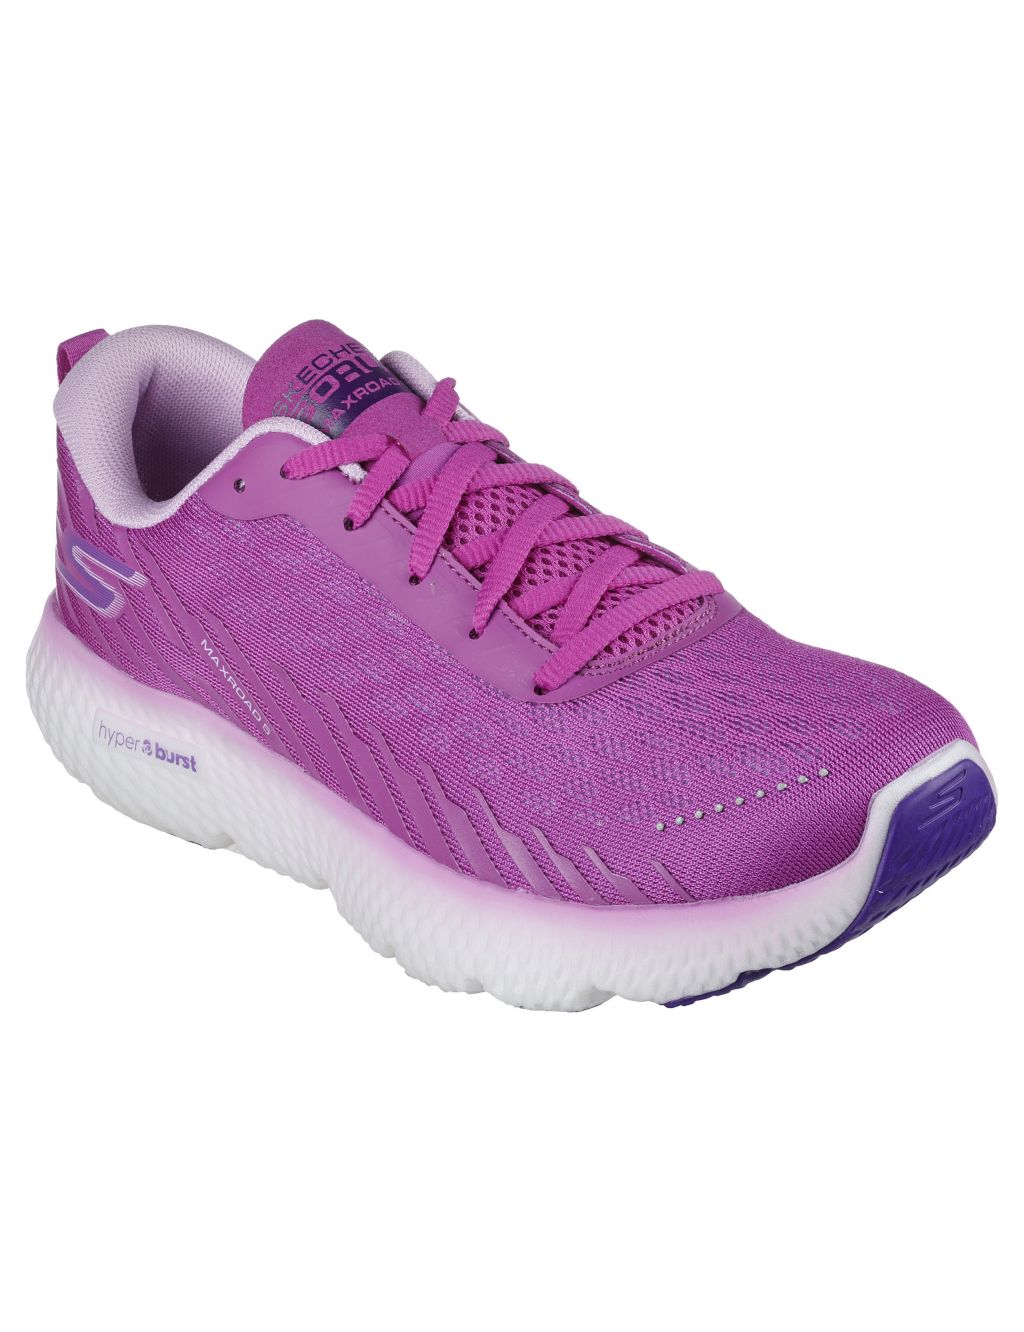 GOrun MaxRoad 5 Knitted Lace Up Trainers image 2